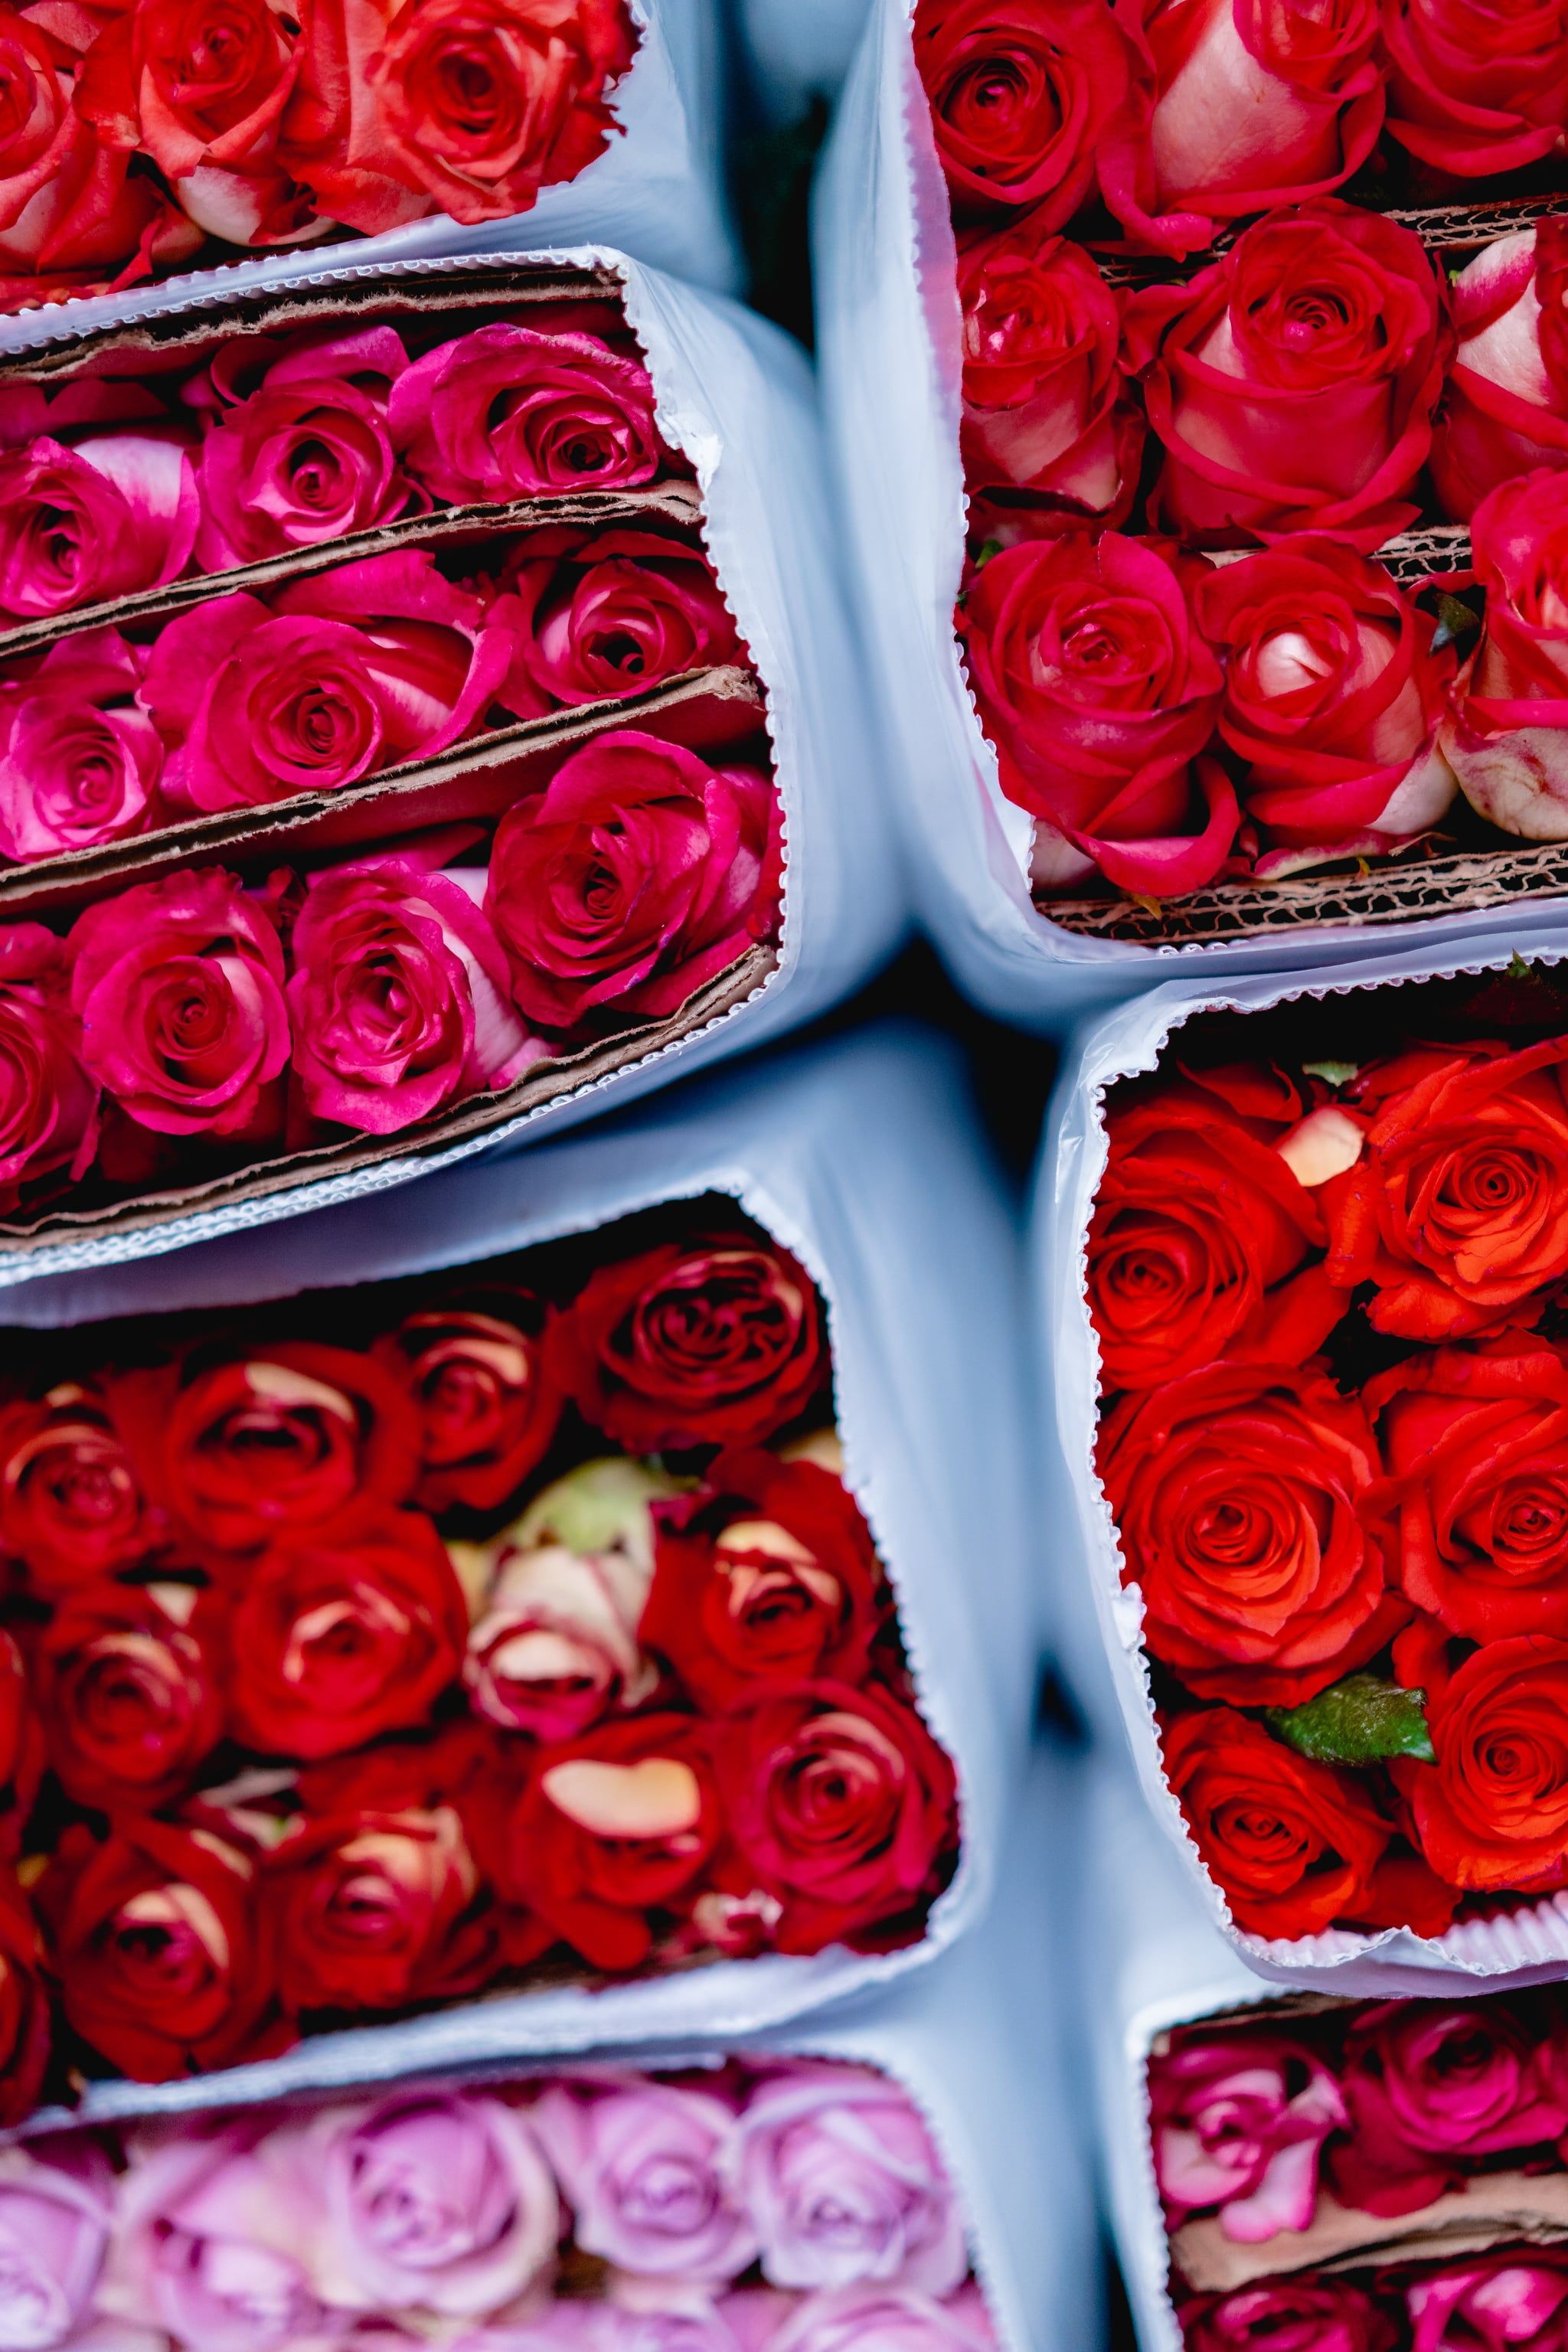 A bunch of red roses in bags - Roses, garden